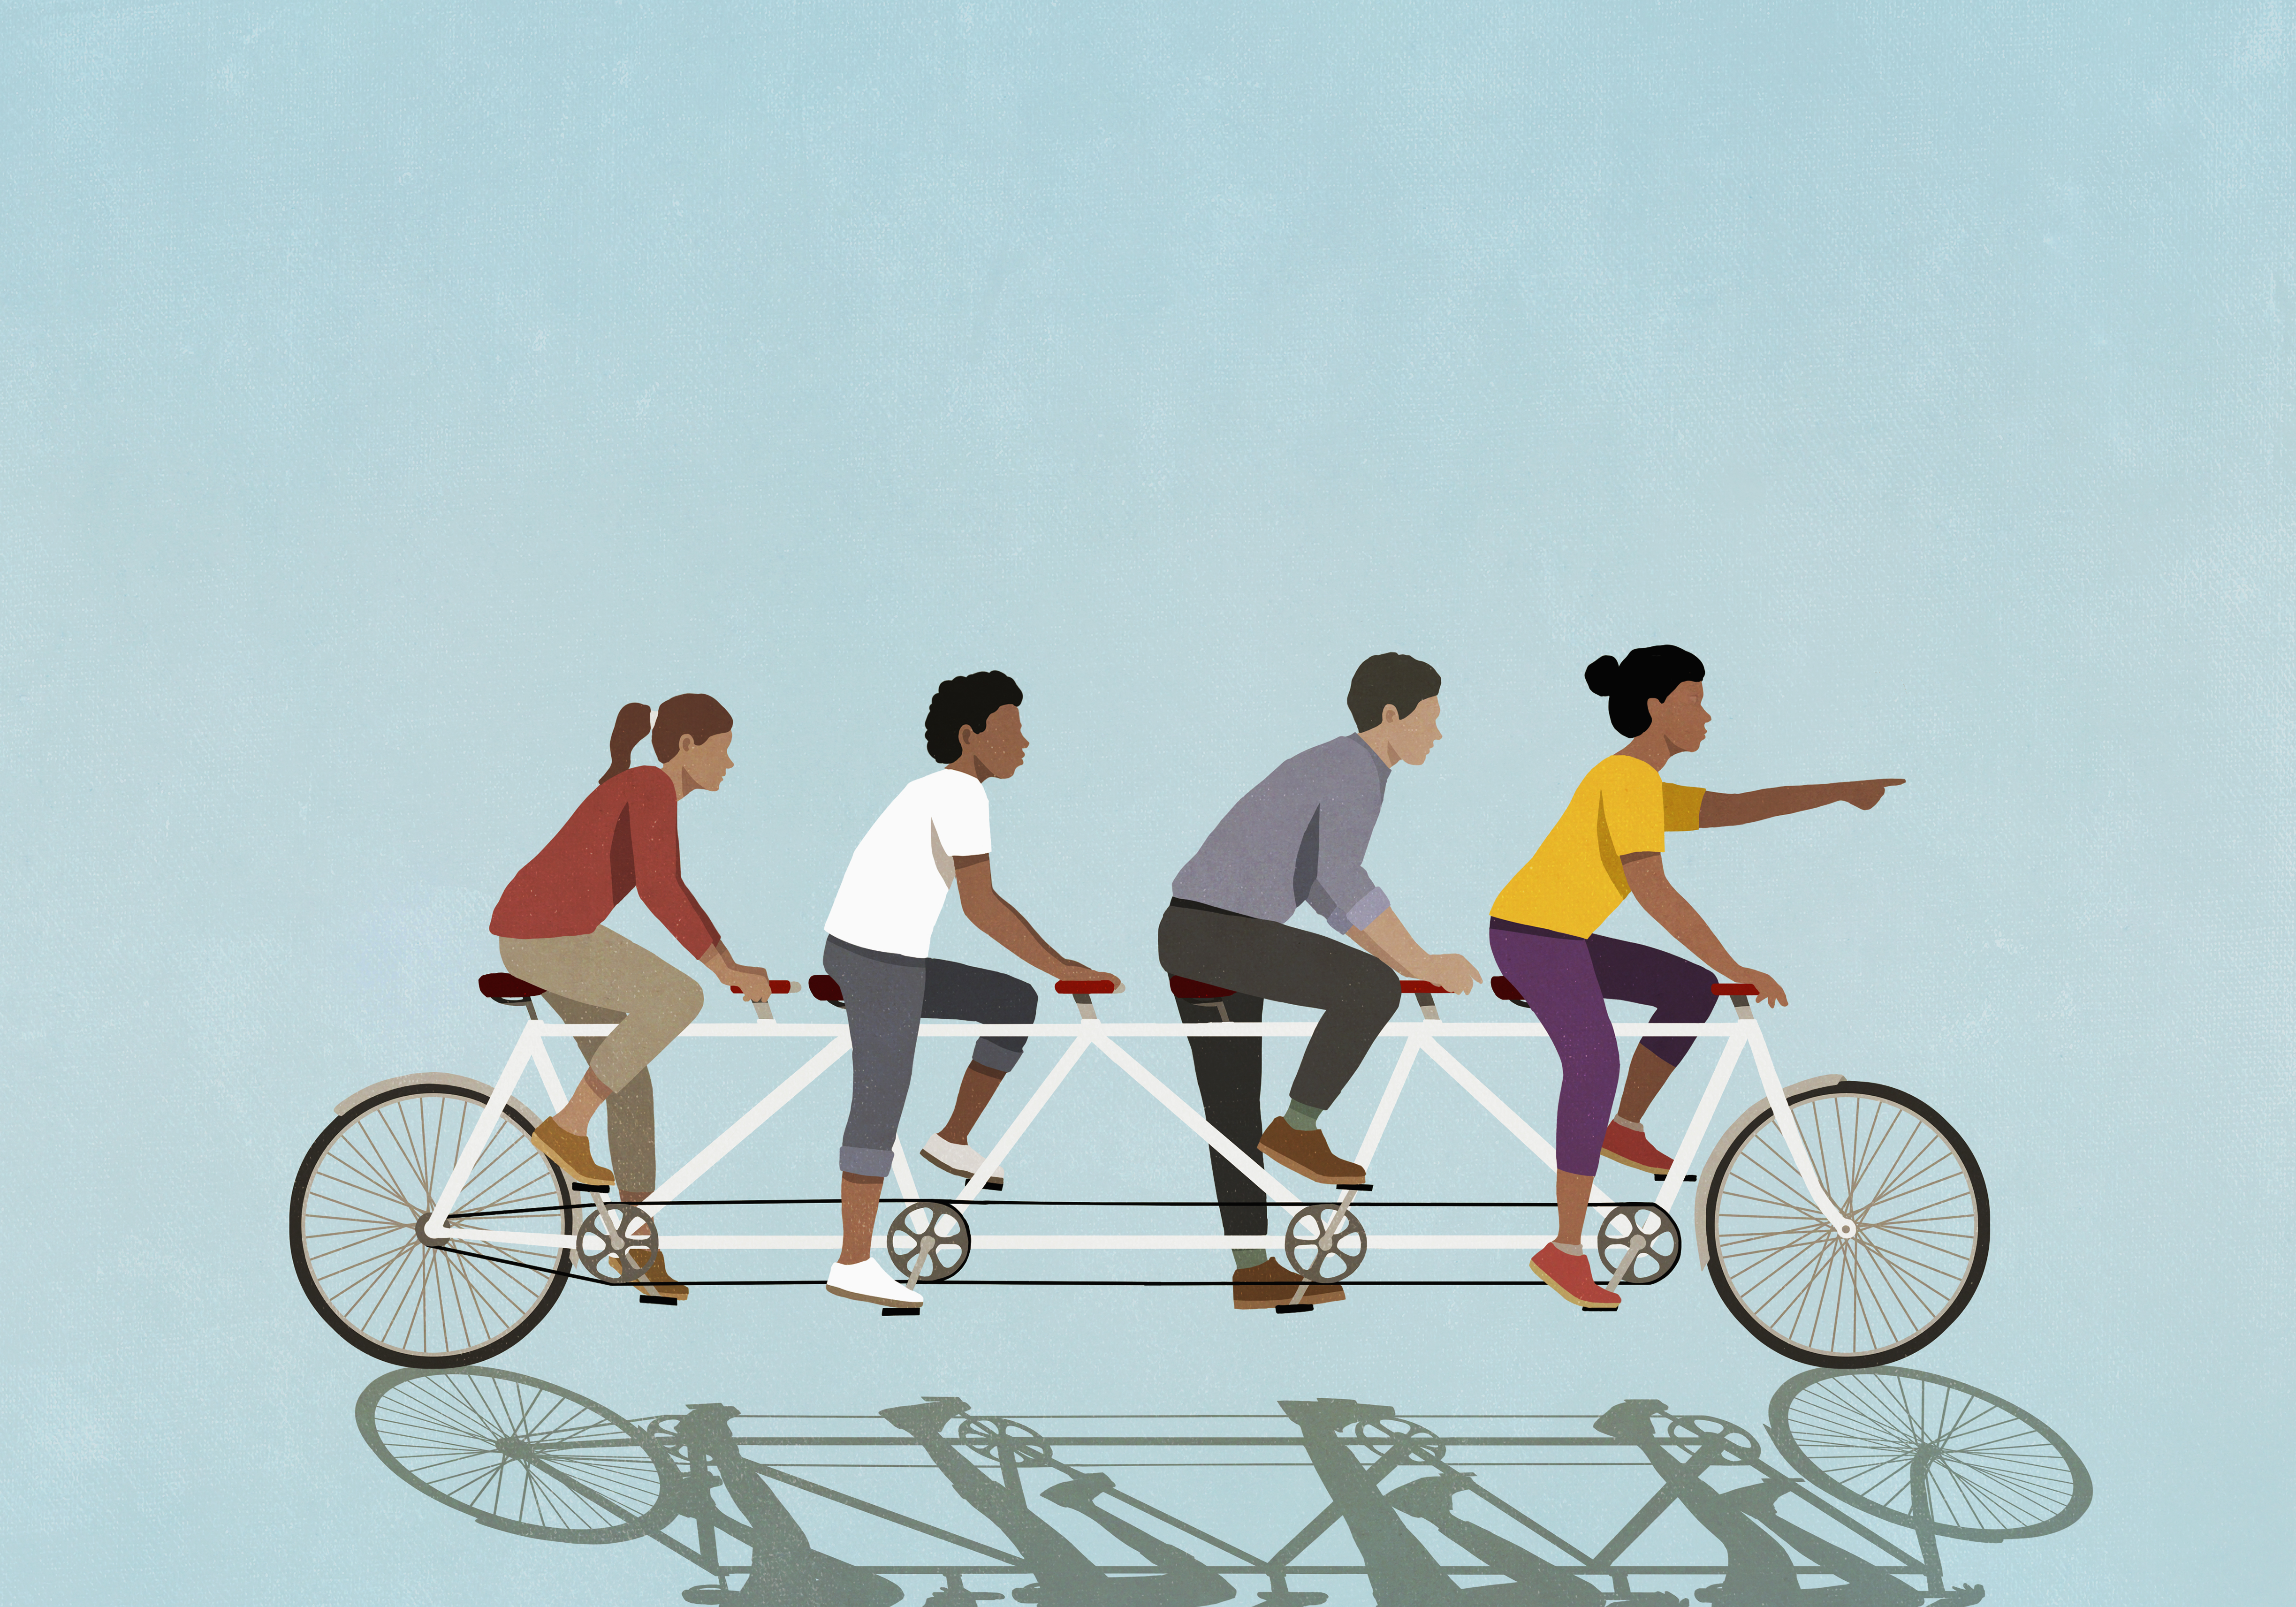 Illustration of friends riding tandem bicycles on a blue background.